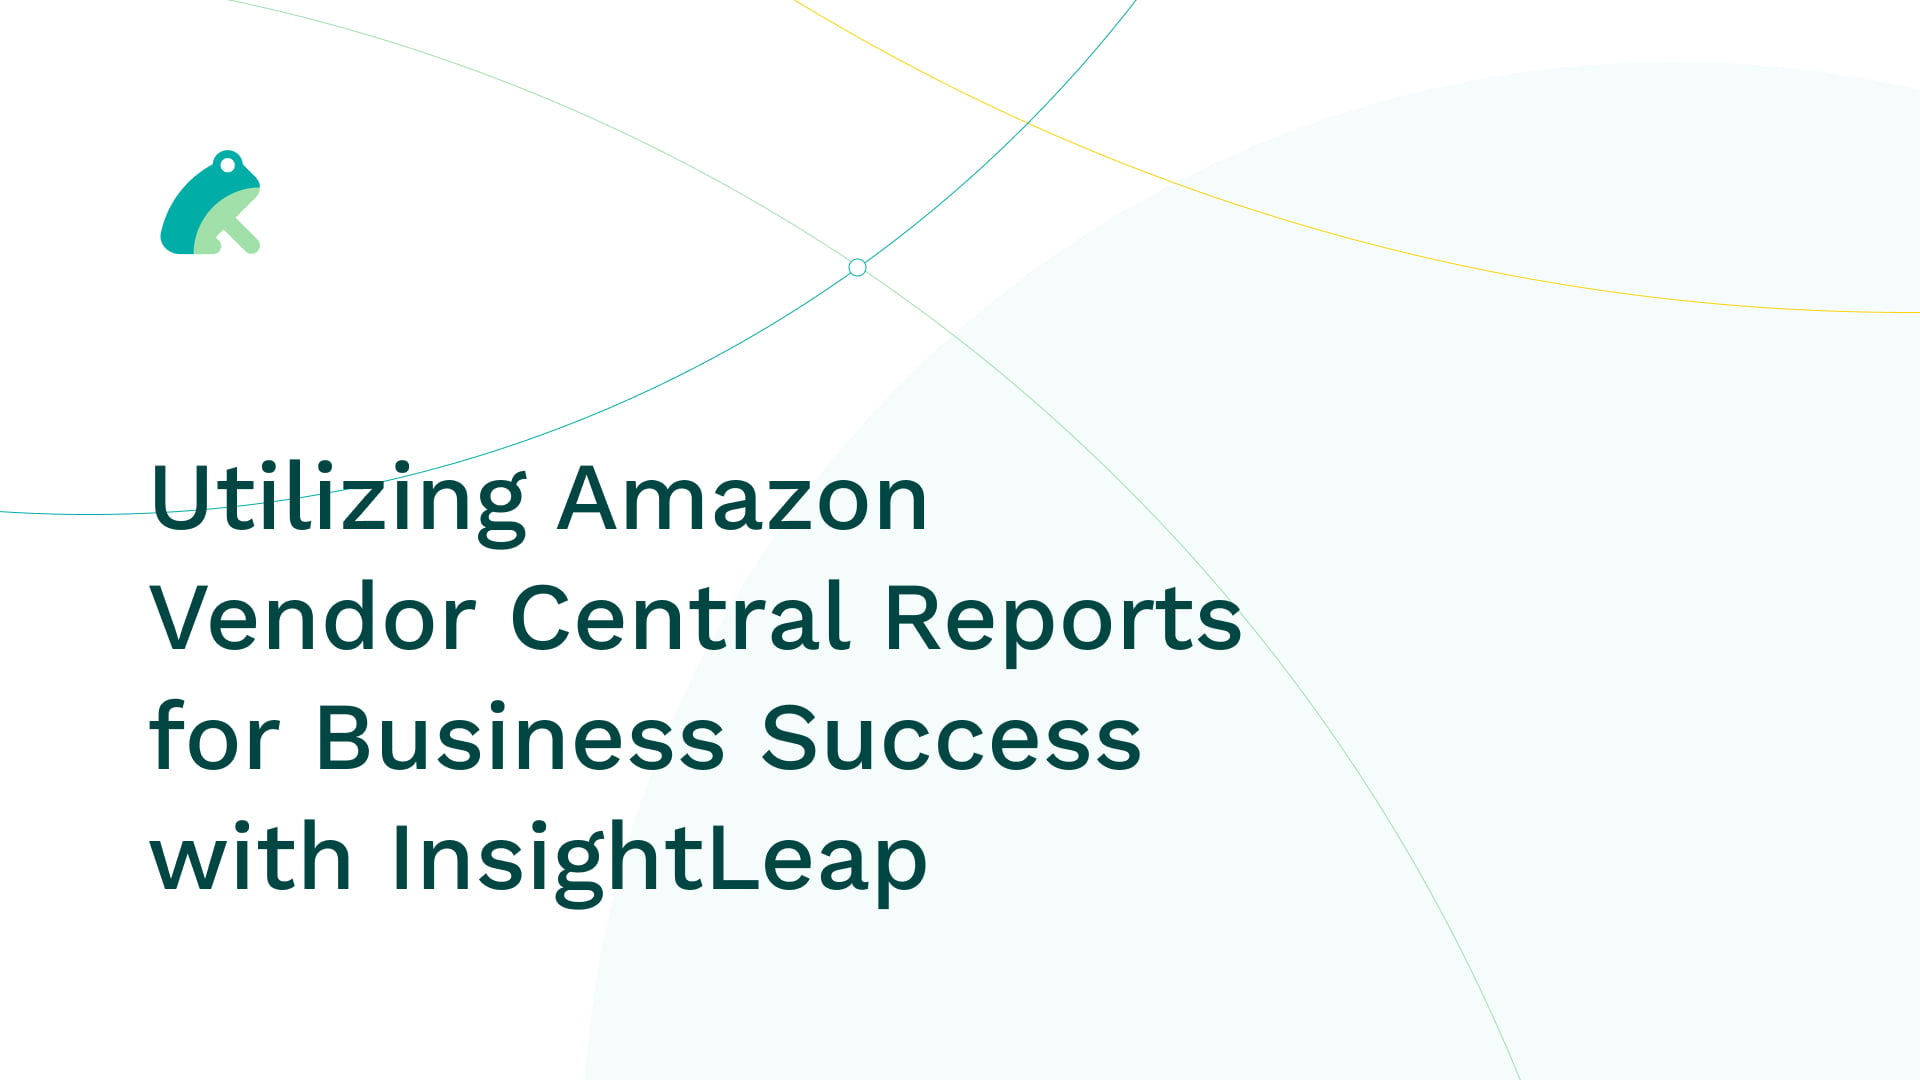 Utilizing Amazon Vendor Central Reports for Business Success with InsightLeap